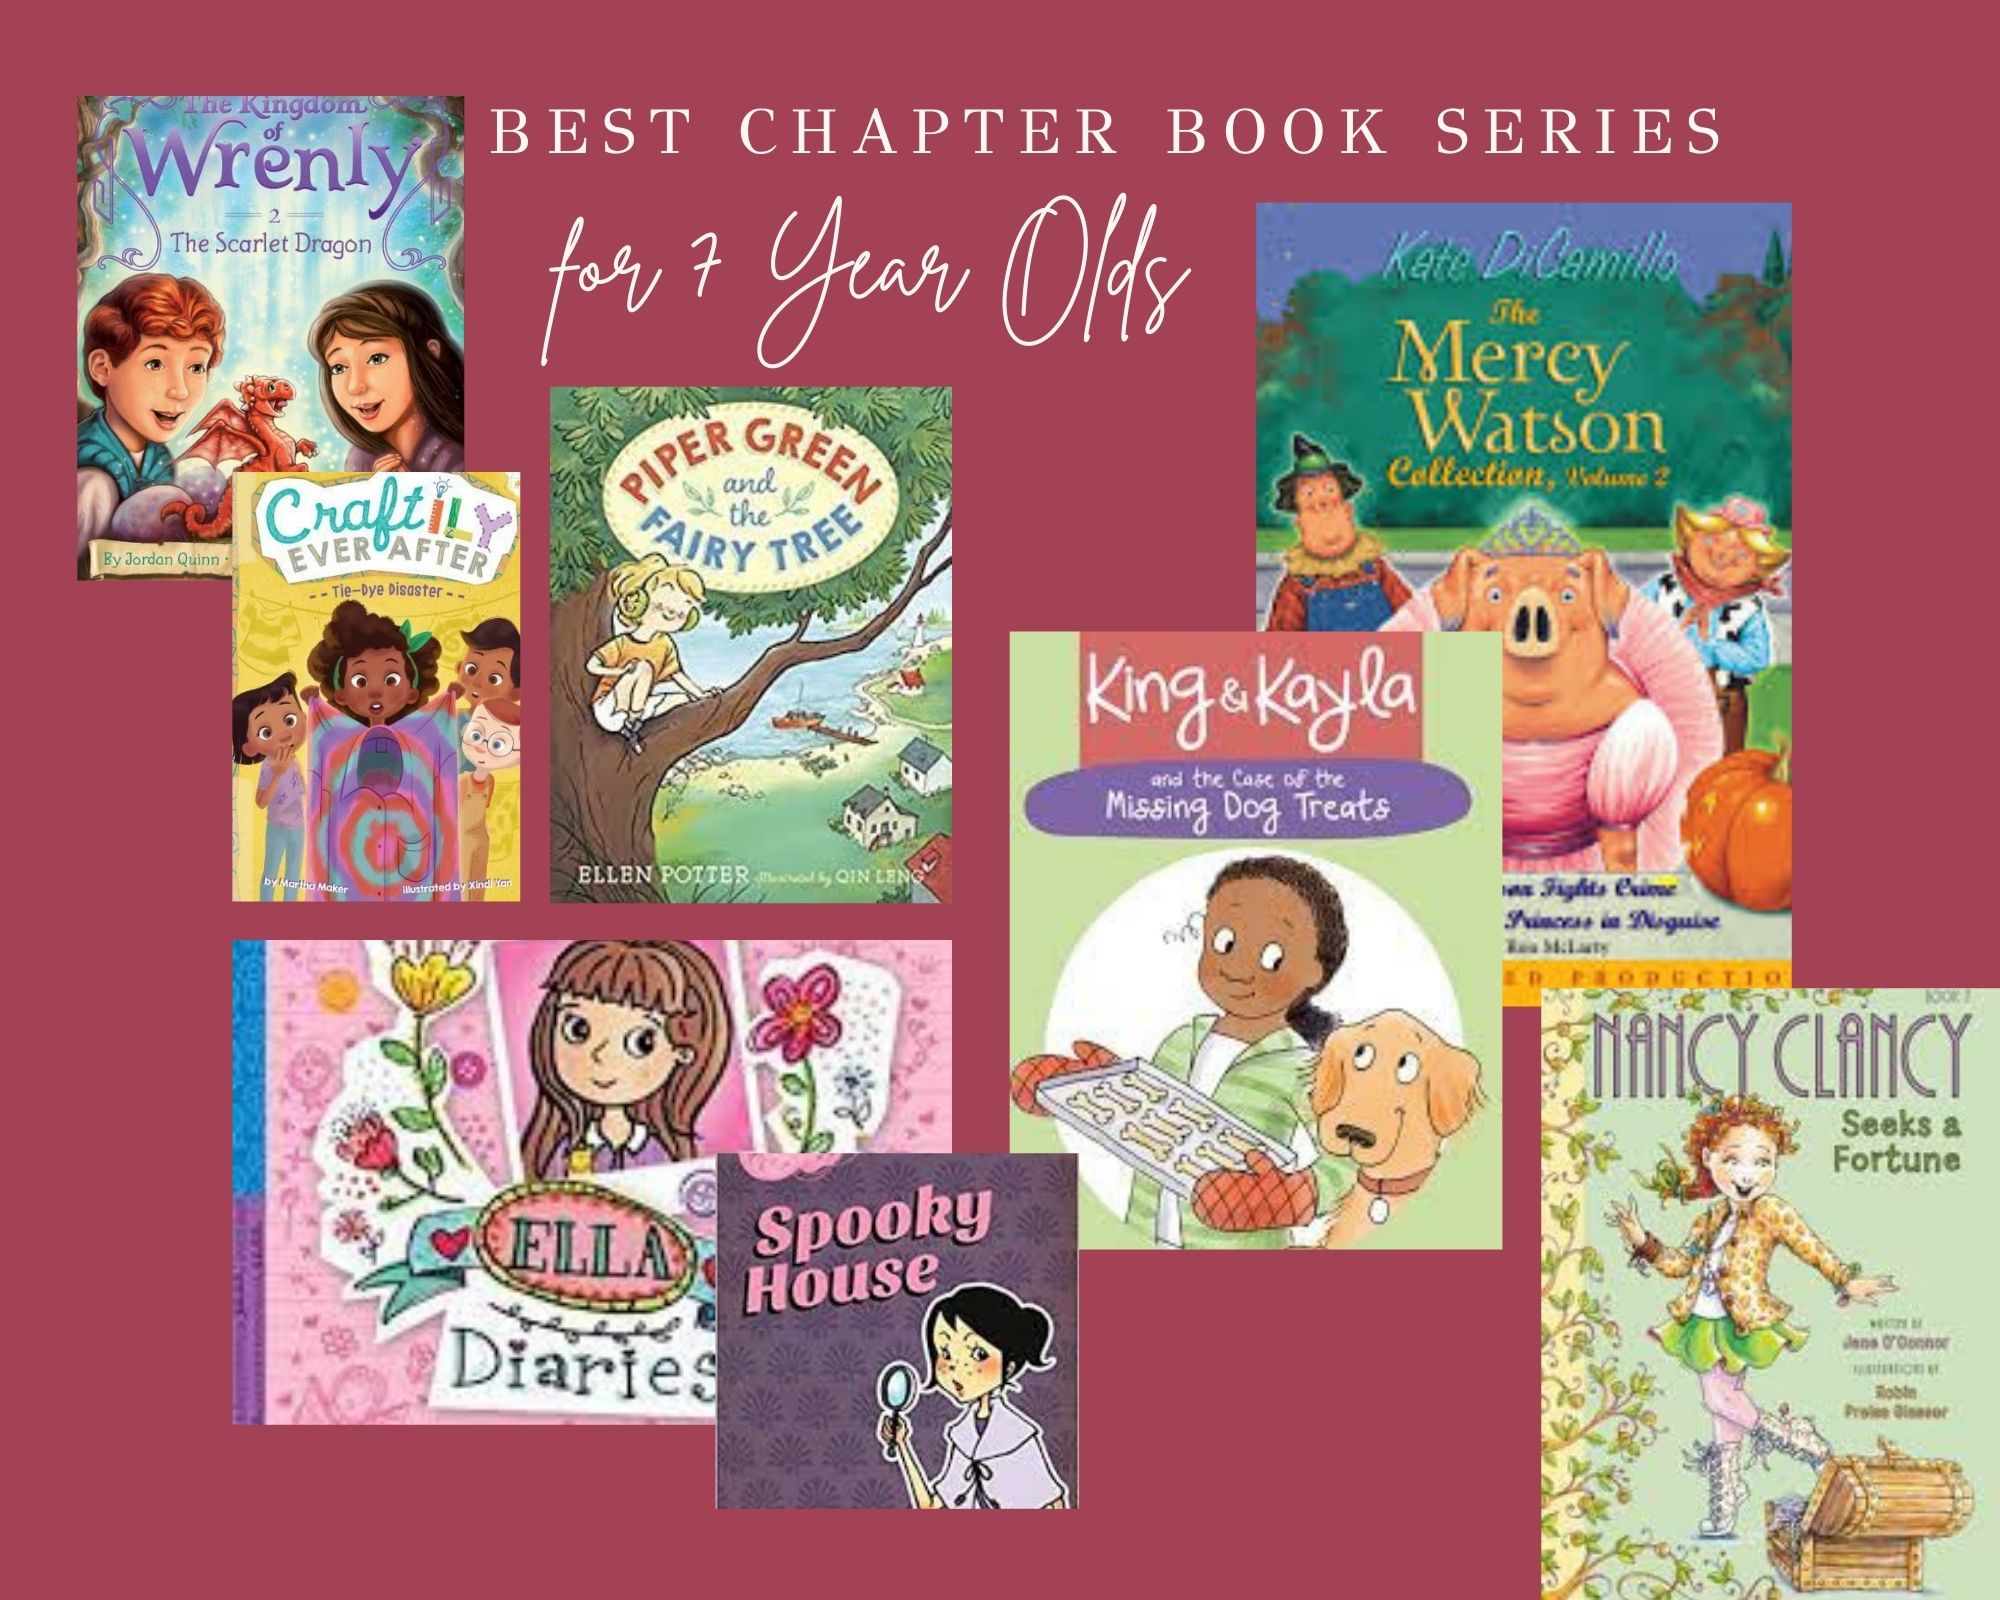 Our Favorite Chapter Book Series for 7 Year Olds - A Healthy Slice of Life